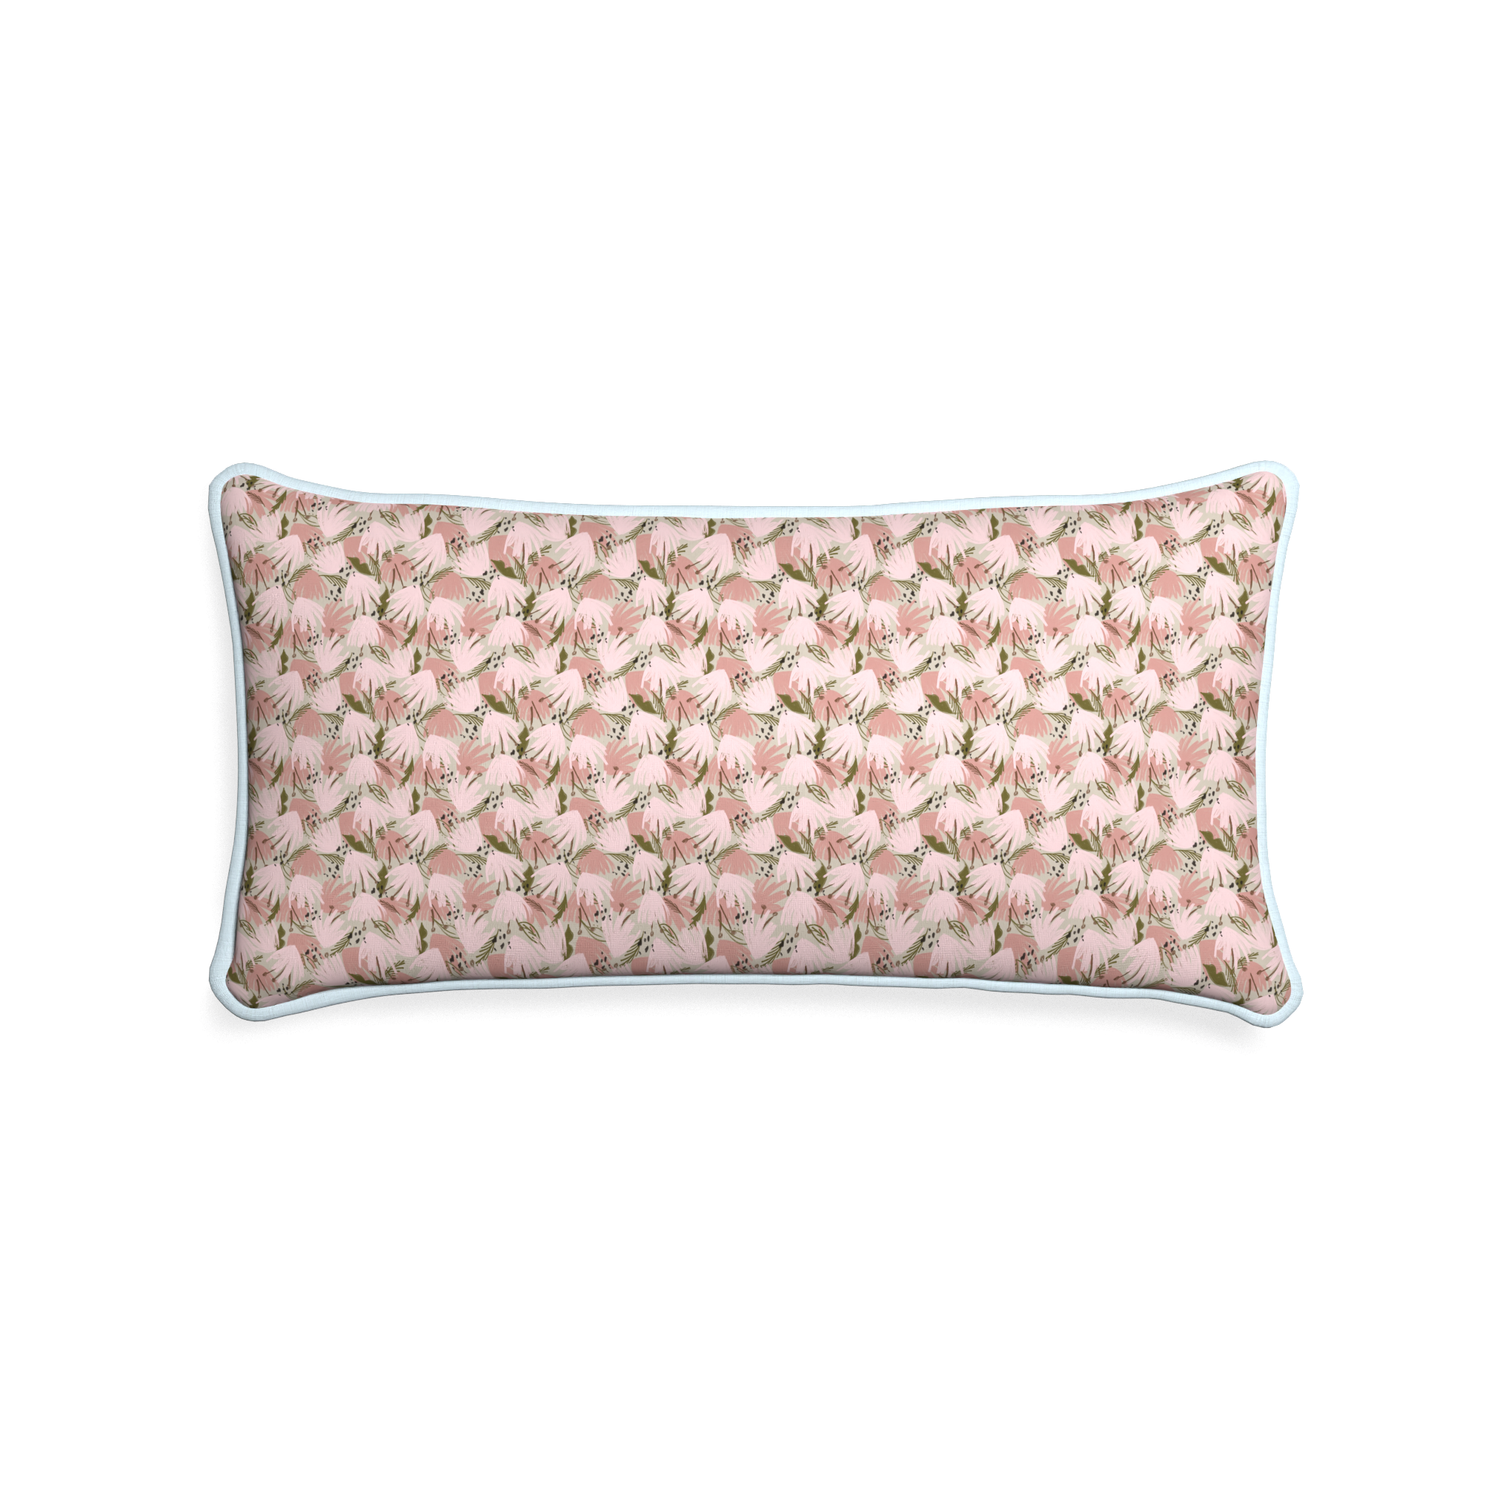 Midi-lumbar eden pink custom pink floralpillow with powder piping on white background